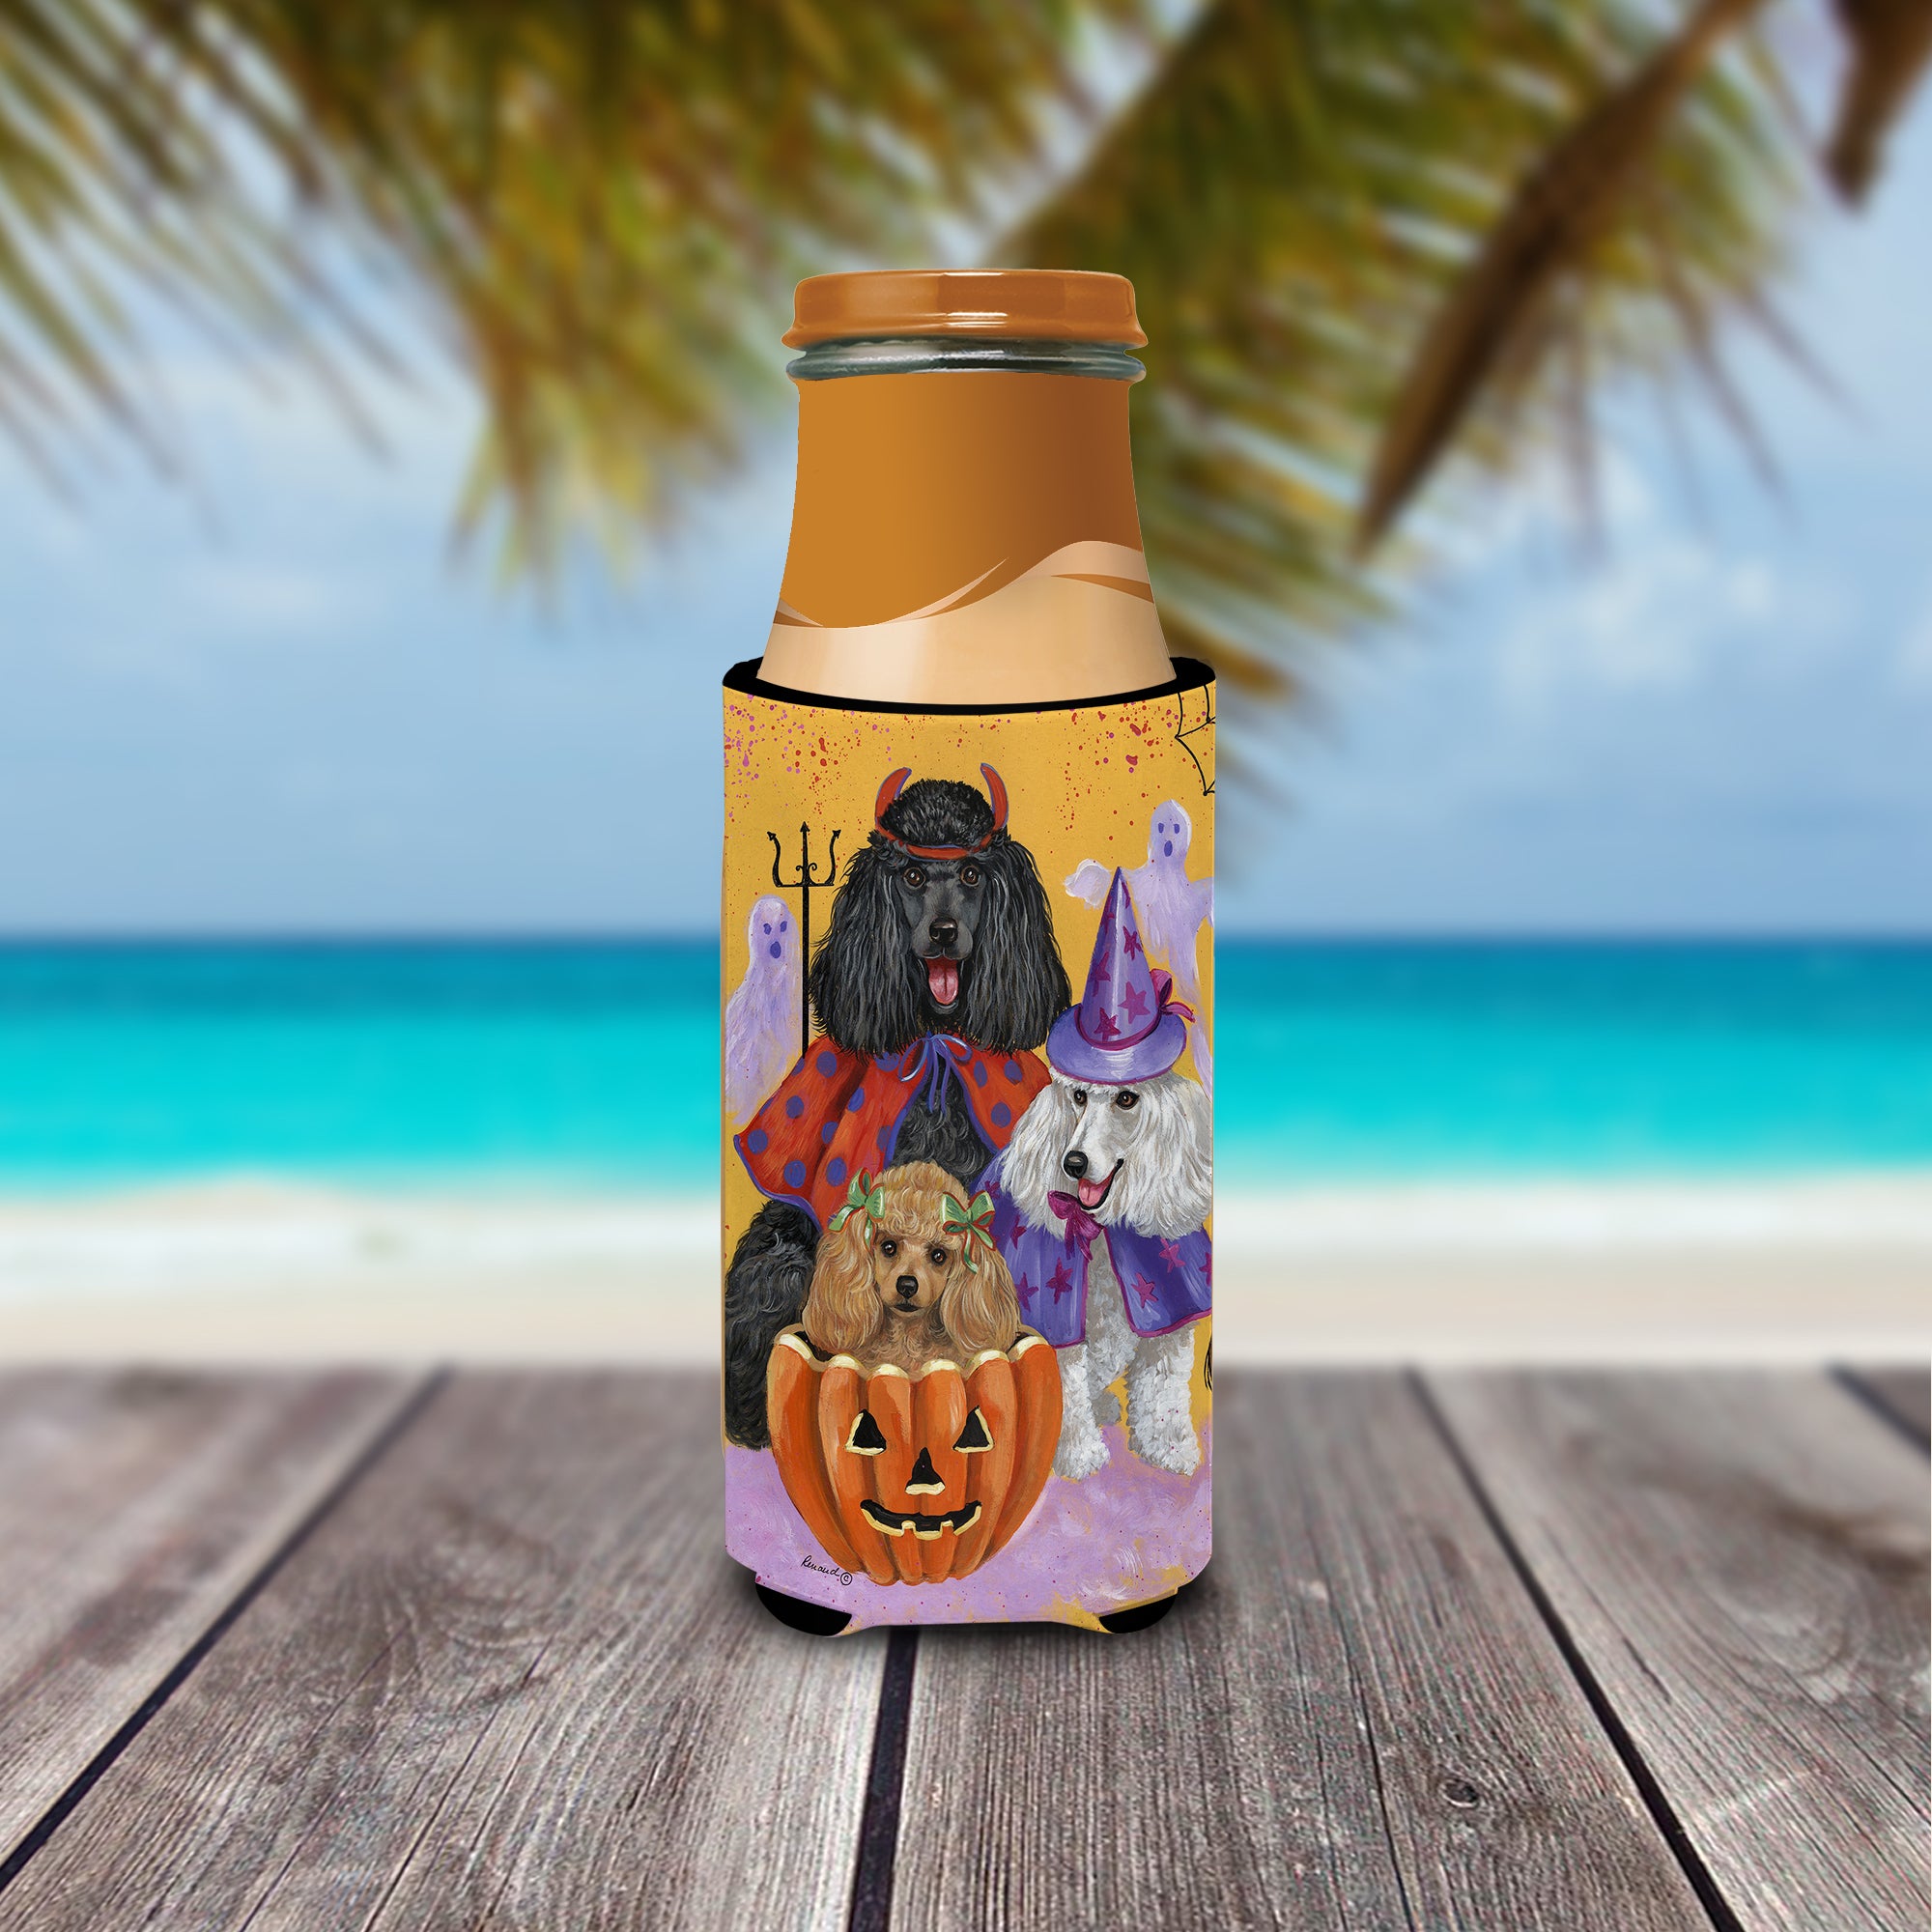 Poodle Halloween Ultra Hugger for slim cans PPP3146MUK